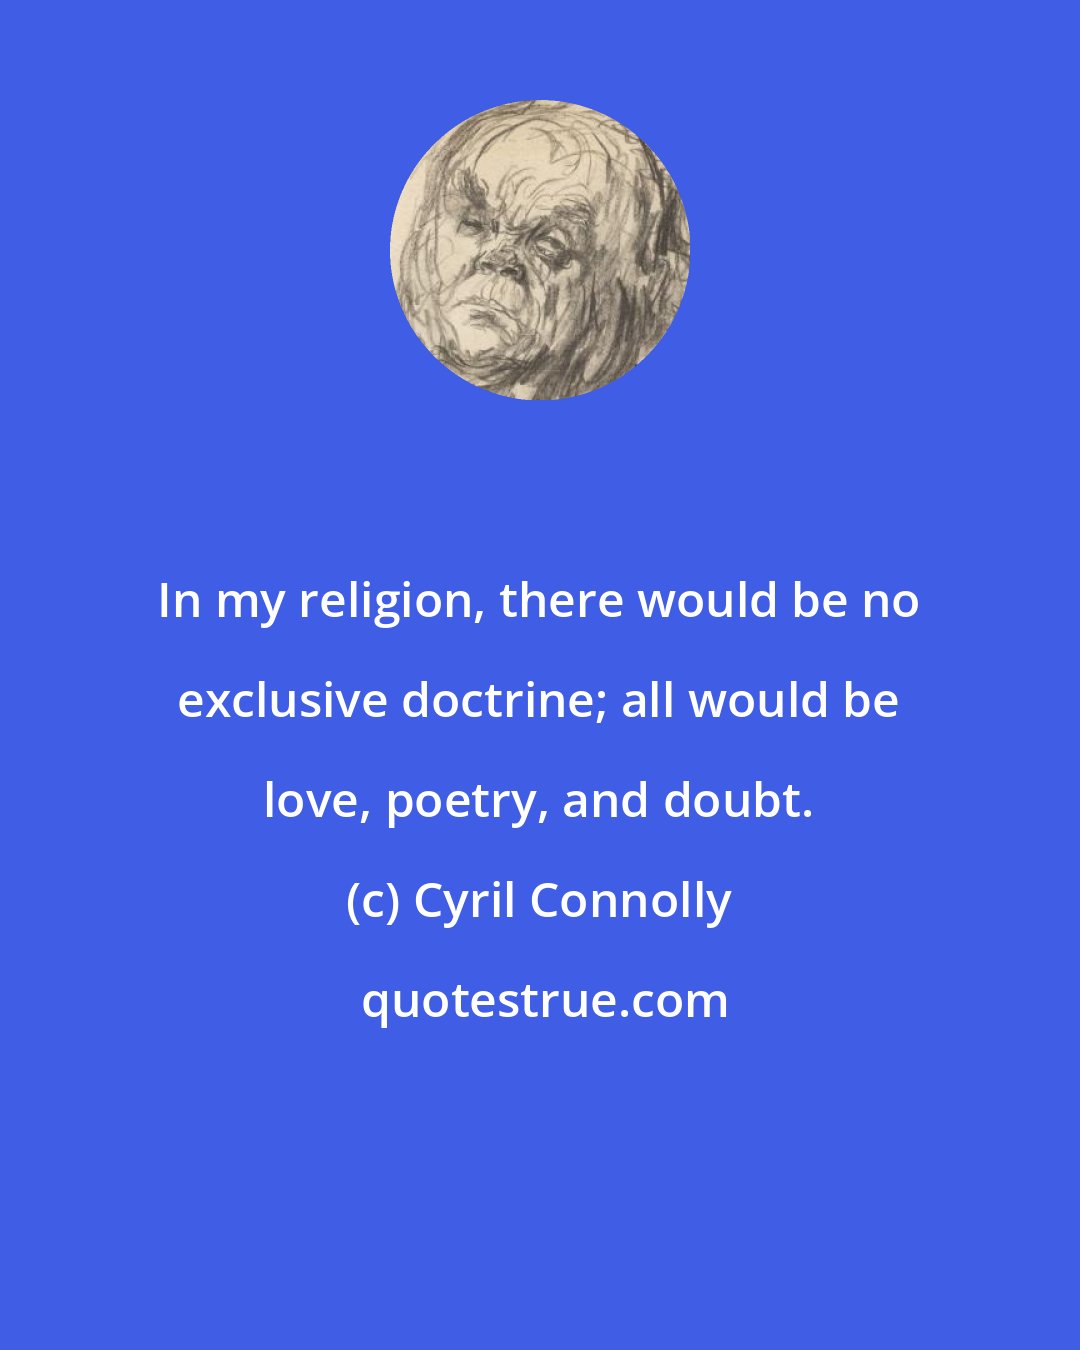 Cyril Connolly: In my religion, there would be no exclusive doctrine; all would be love, poetry, and doubt.